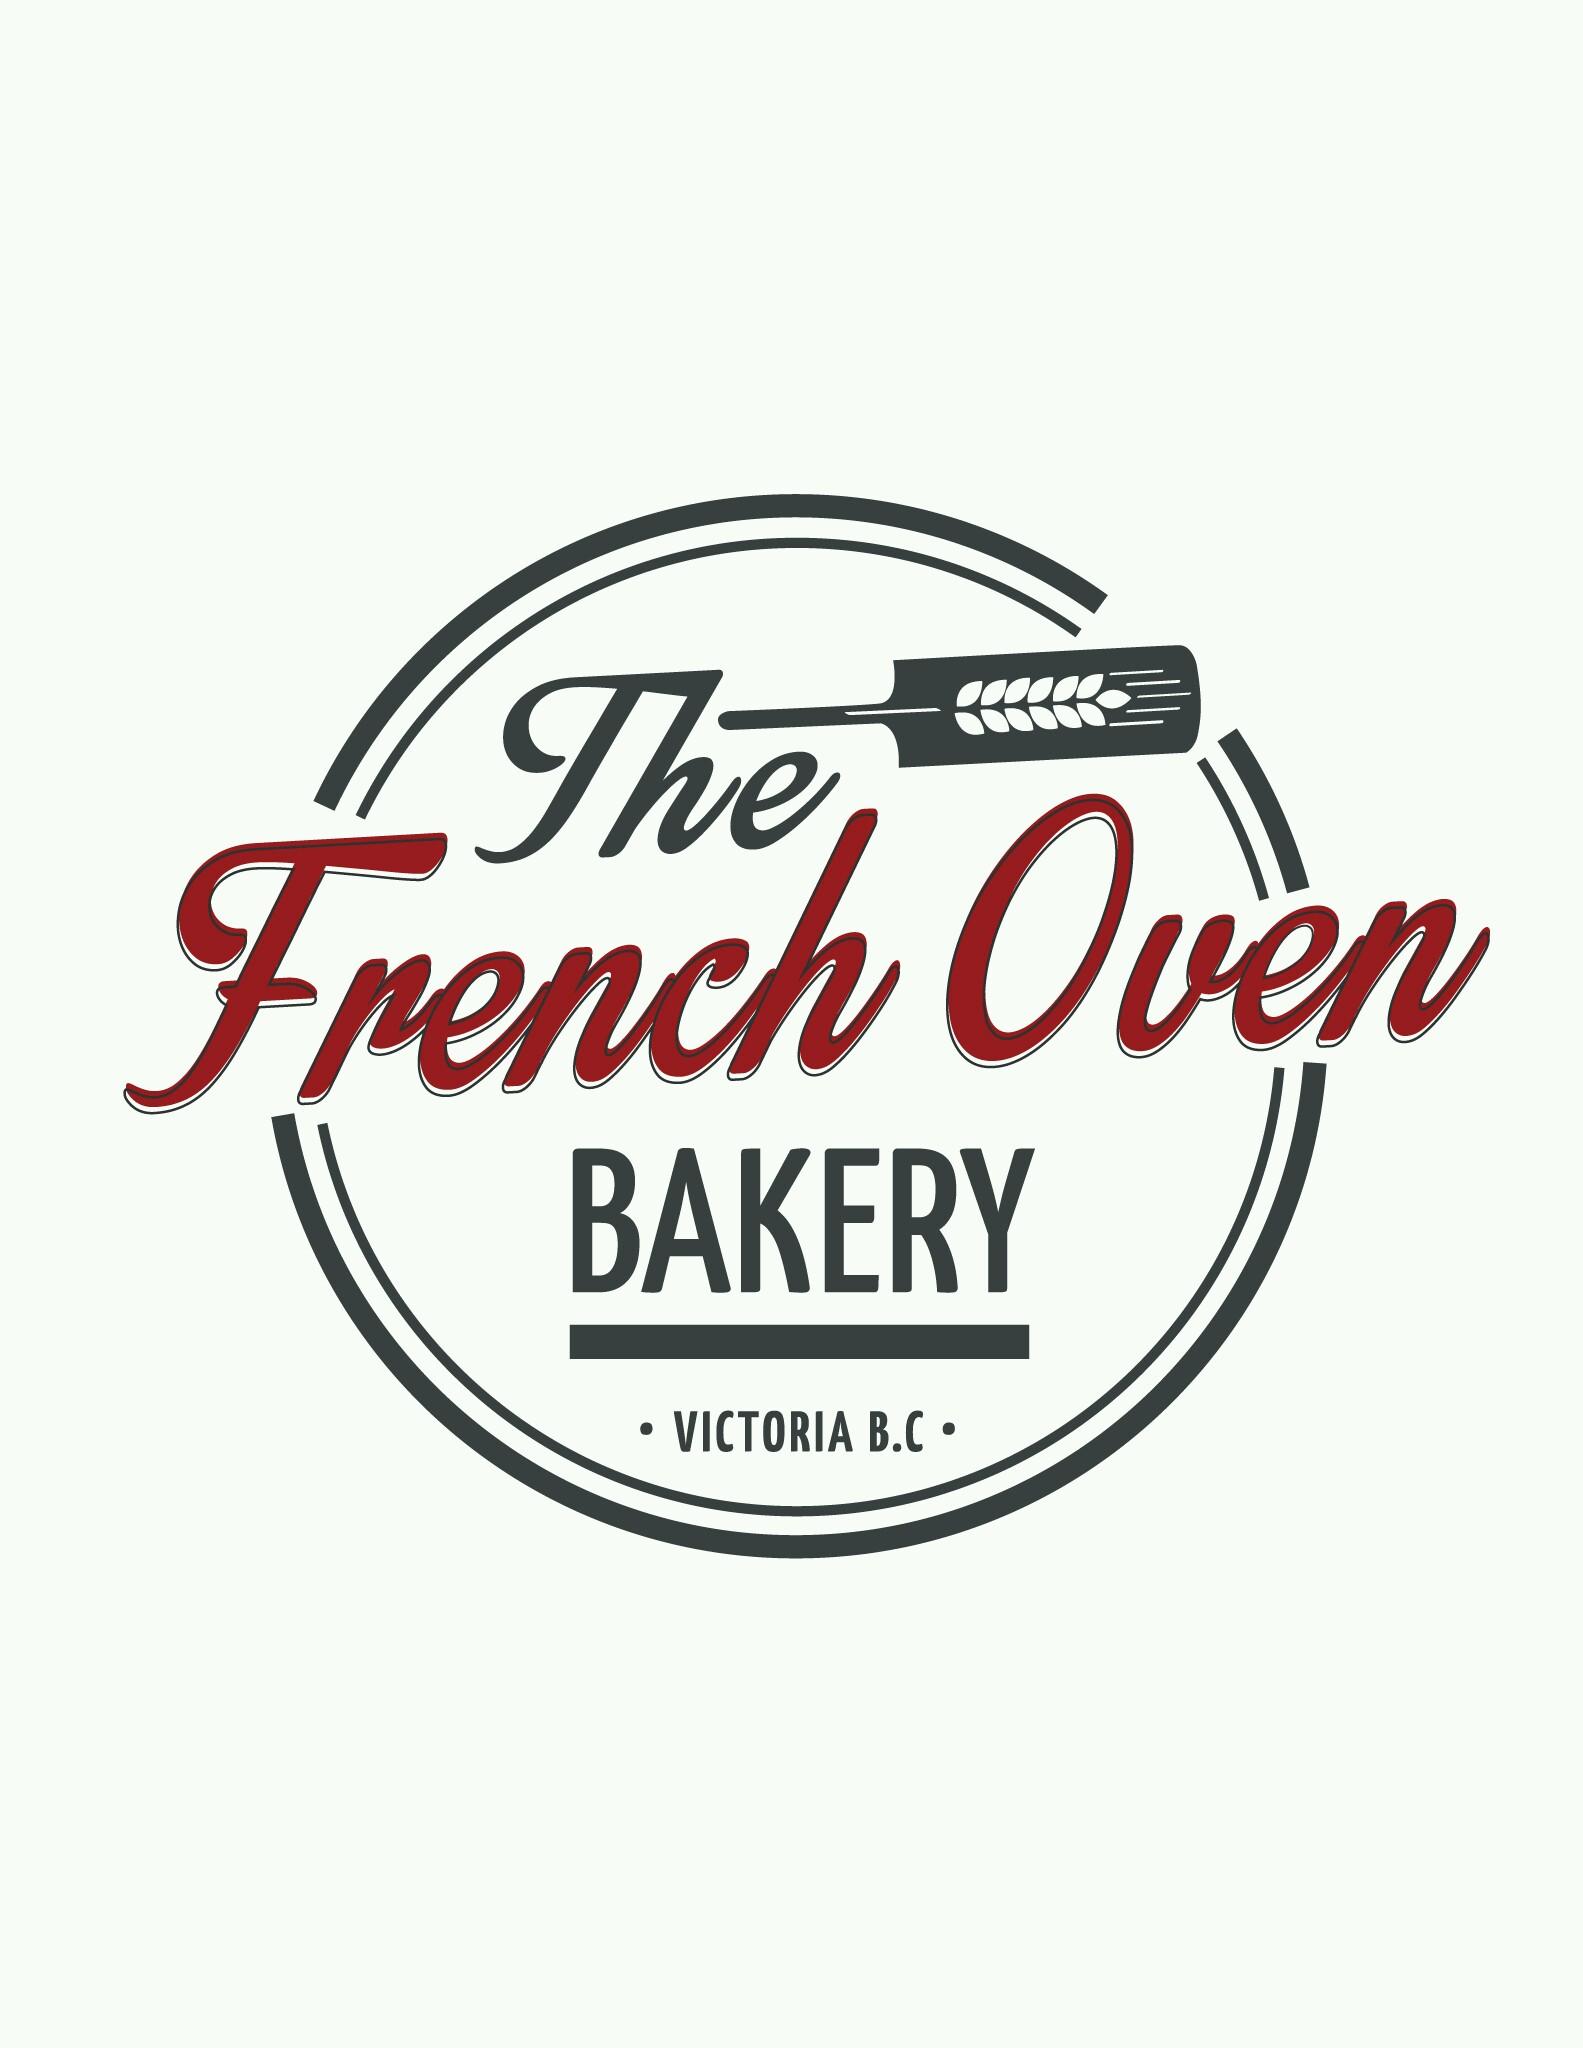 A French Master Baker by trade in Victoria BC.... Croissants, Baguettes, Brioches.